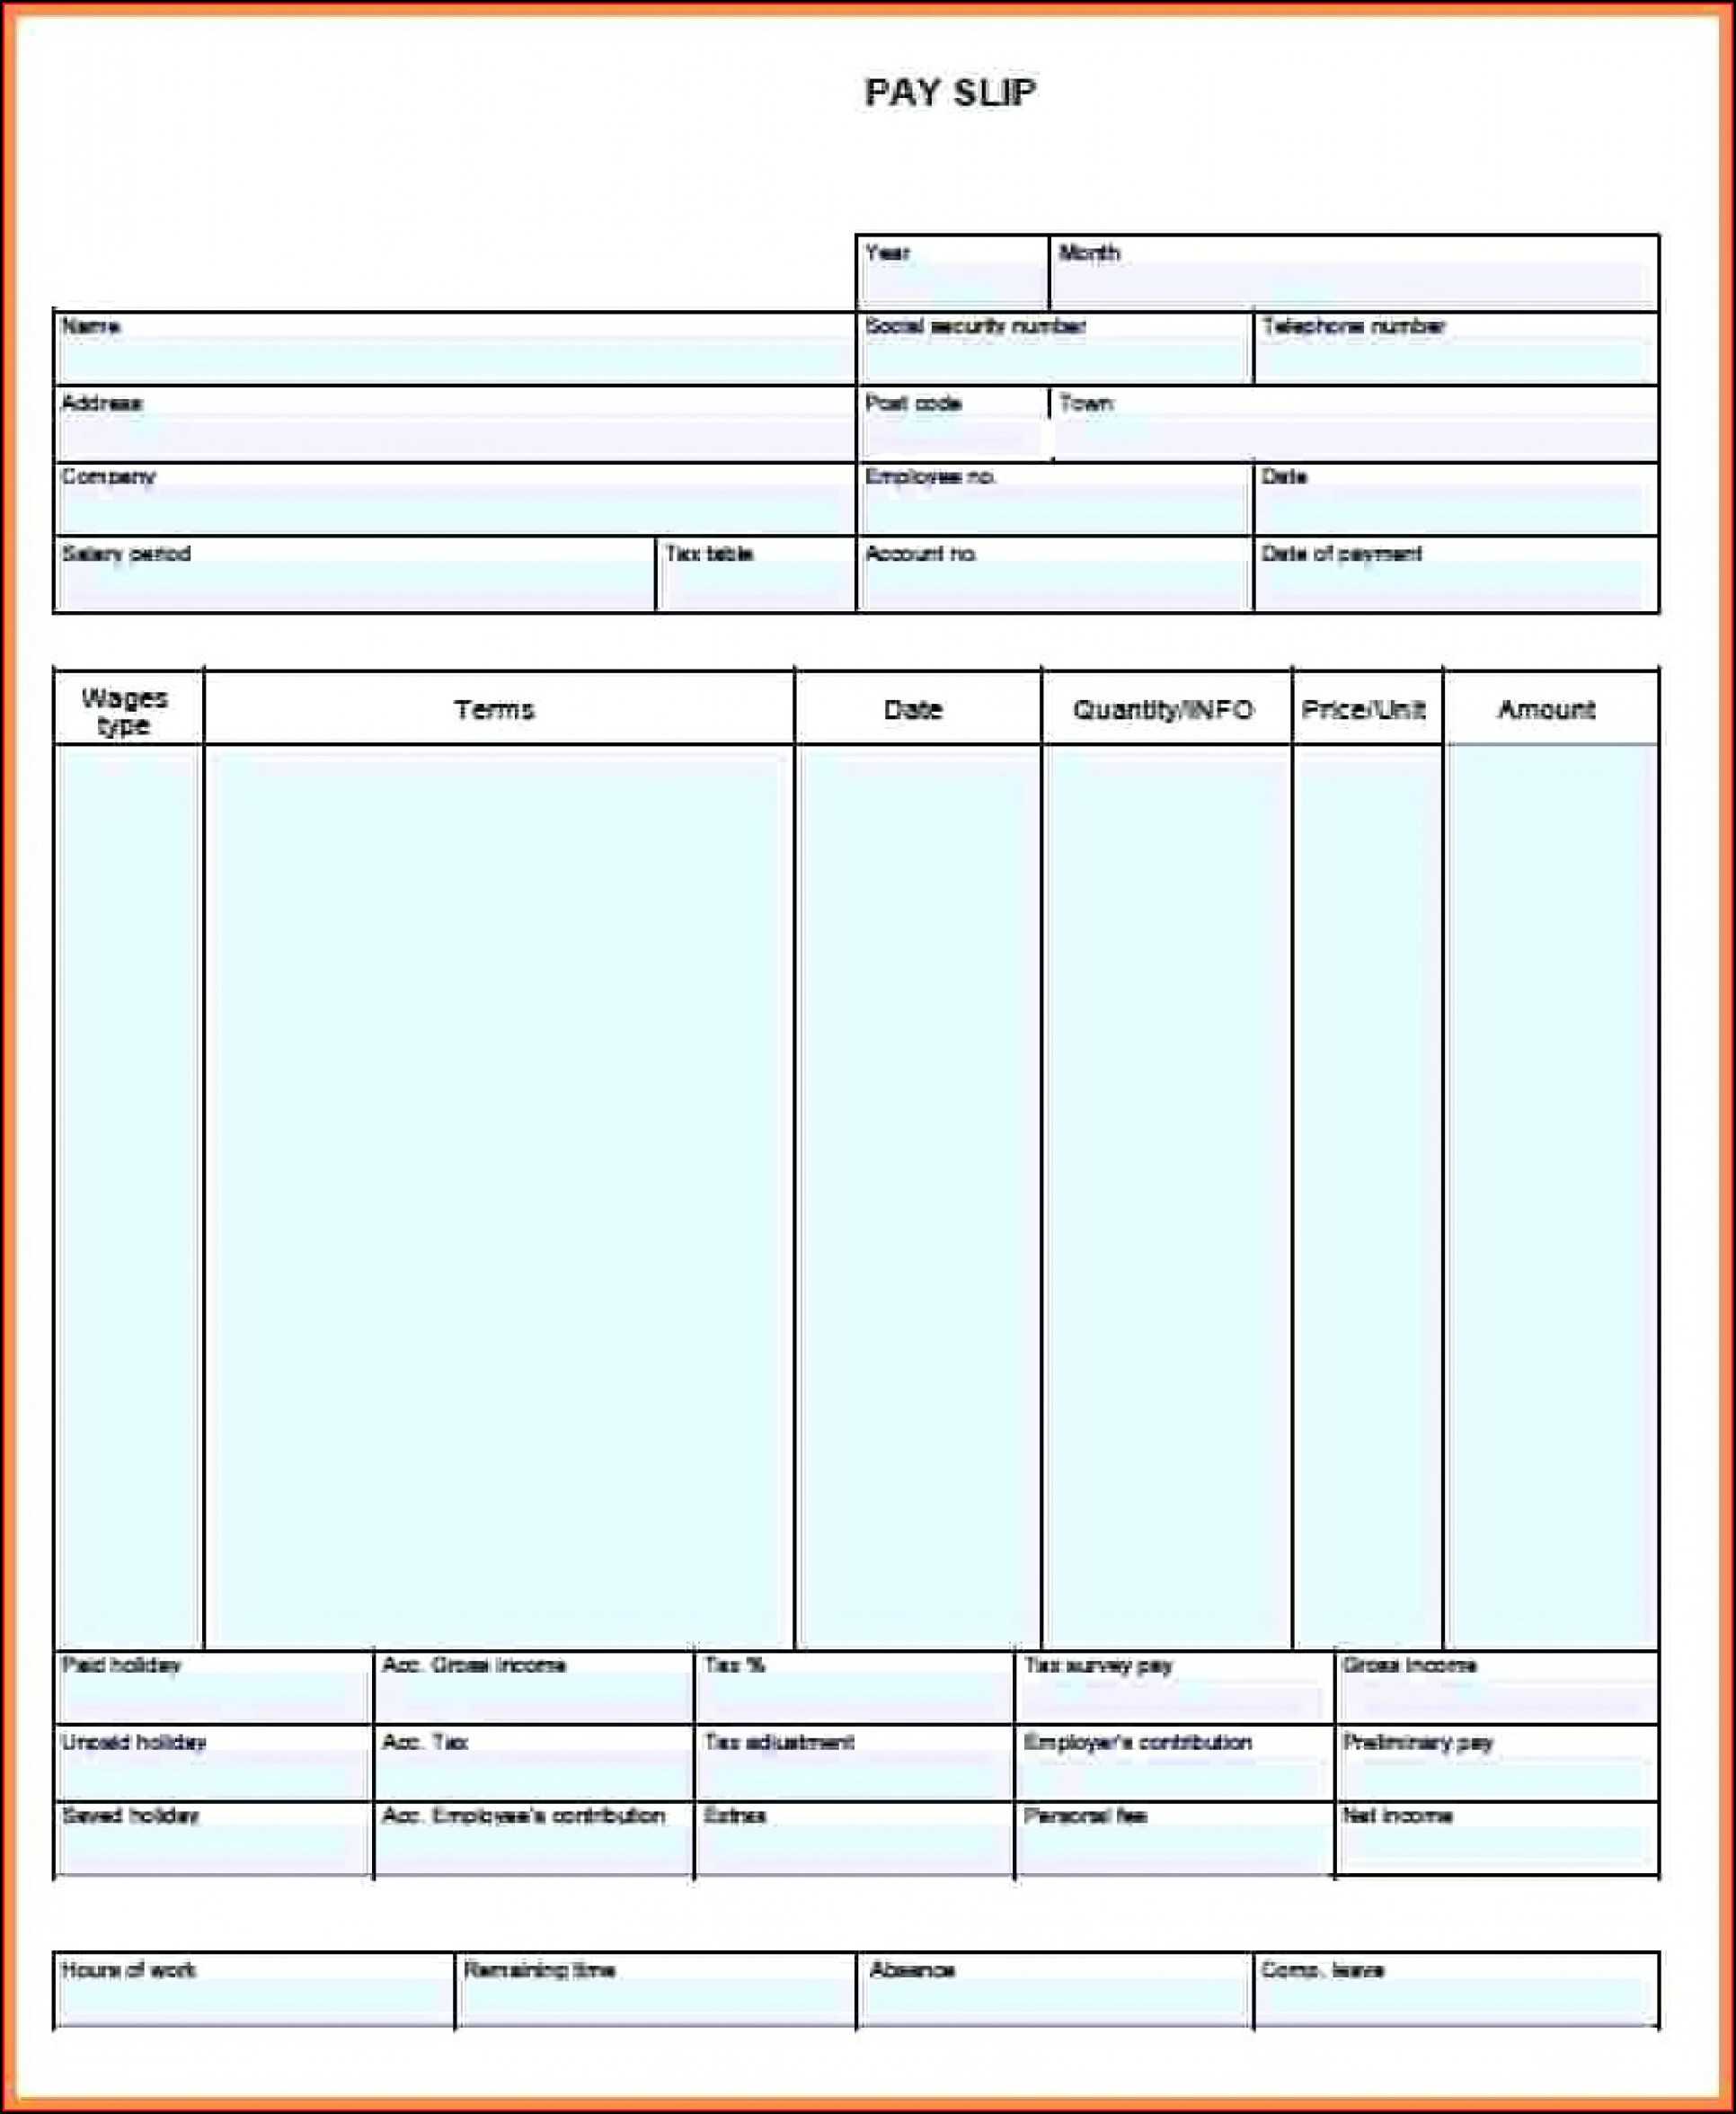 Adp Pay Stub Template Download – Template 1 : Resume Inside Blank Pay Stubs Template